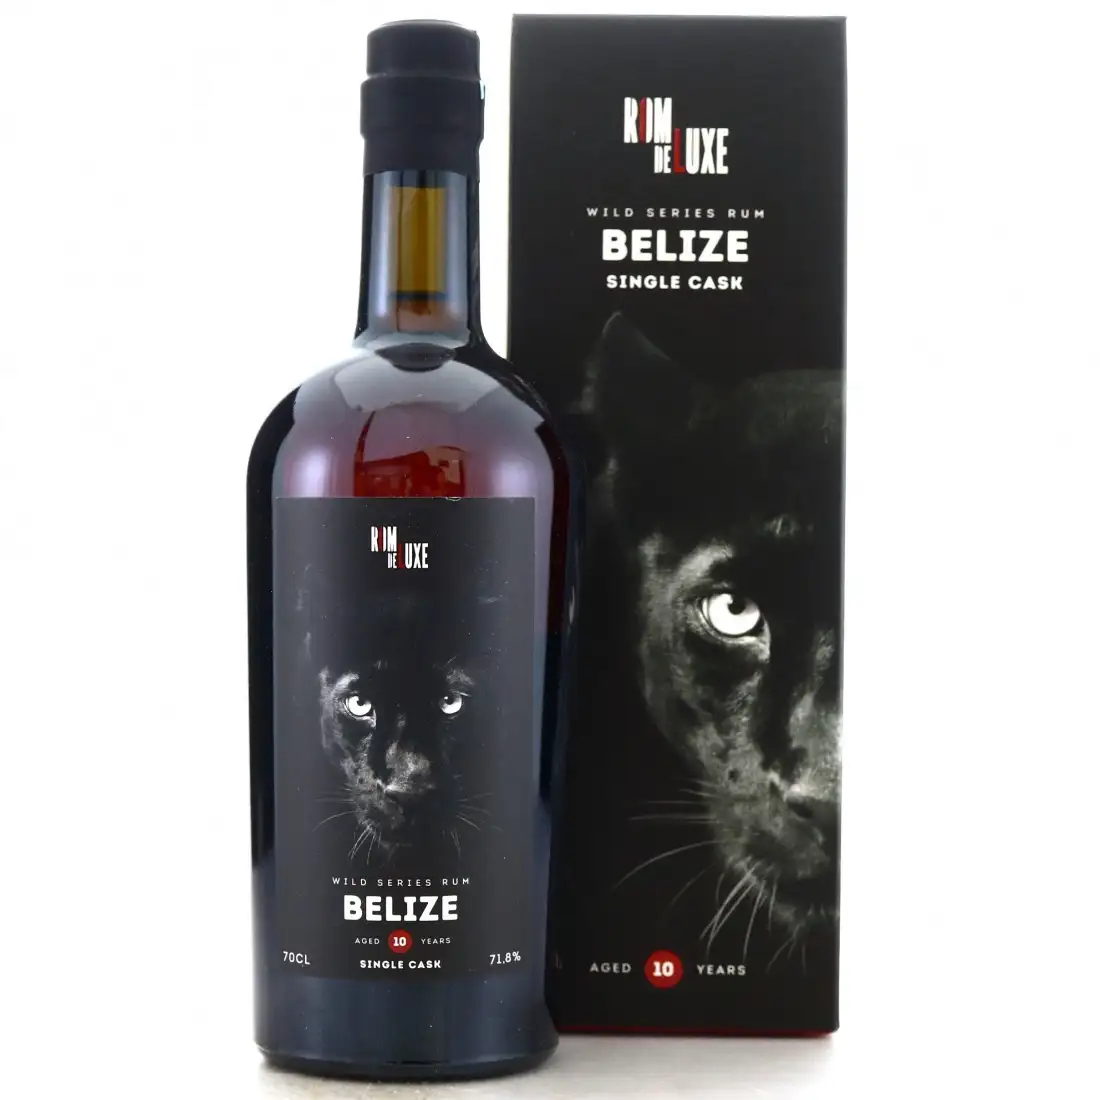 Image of the front of the bottle of the rum Wild Series Rum Belize No. 4